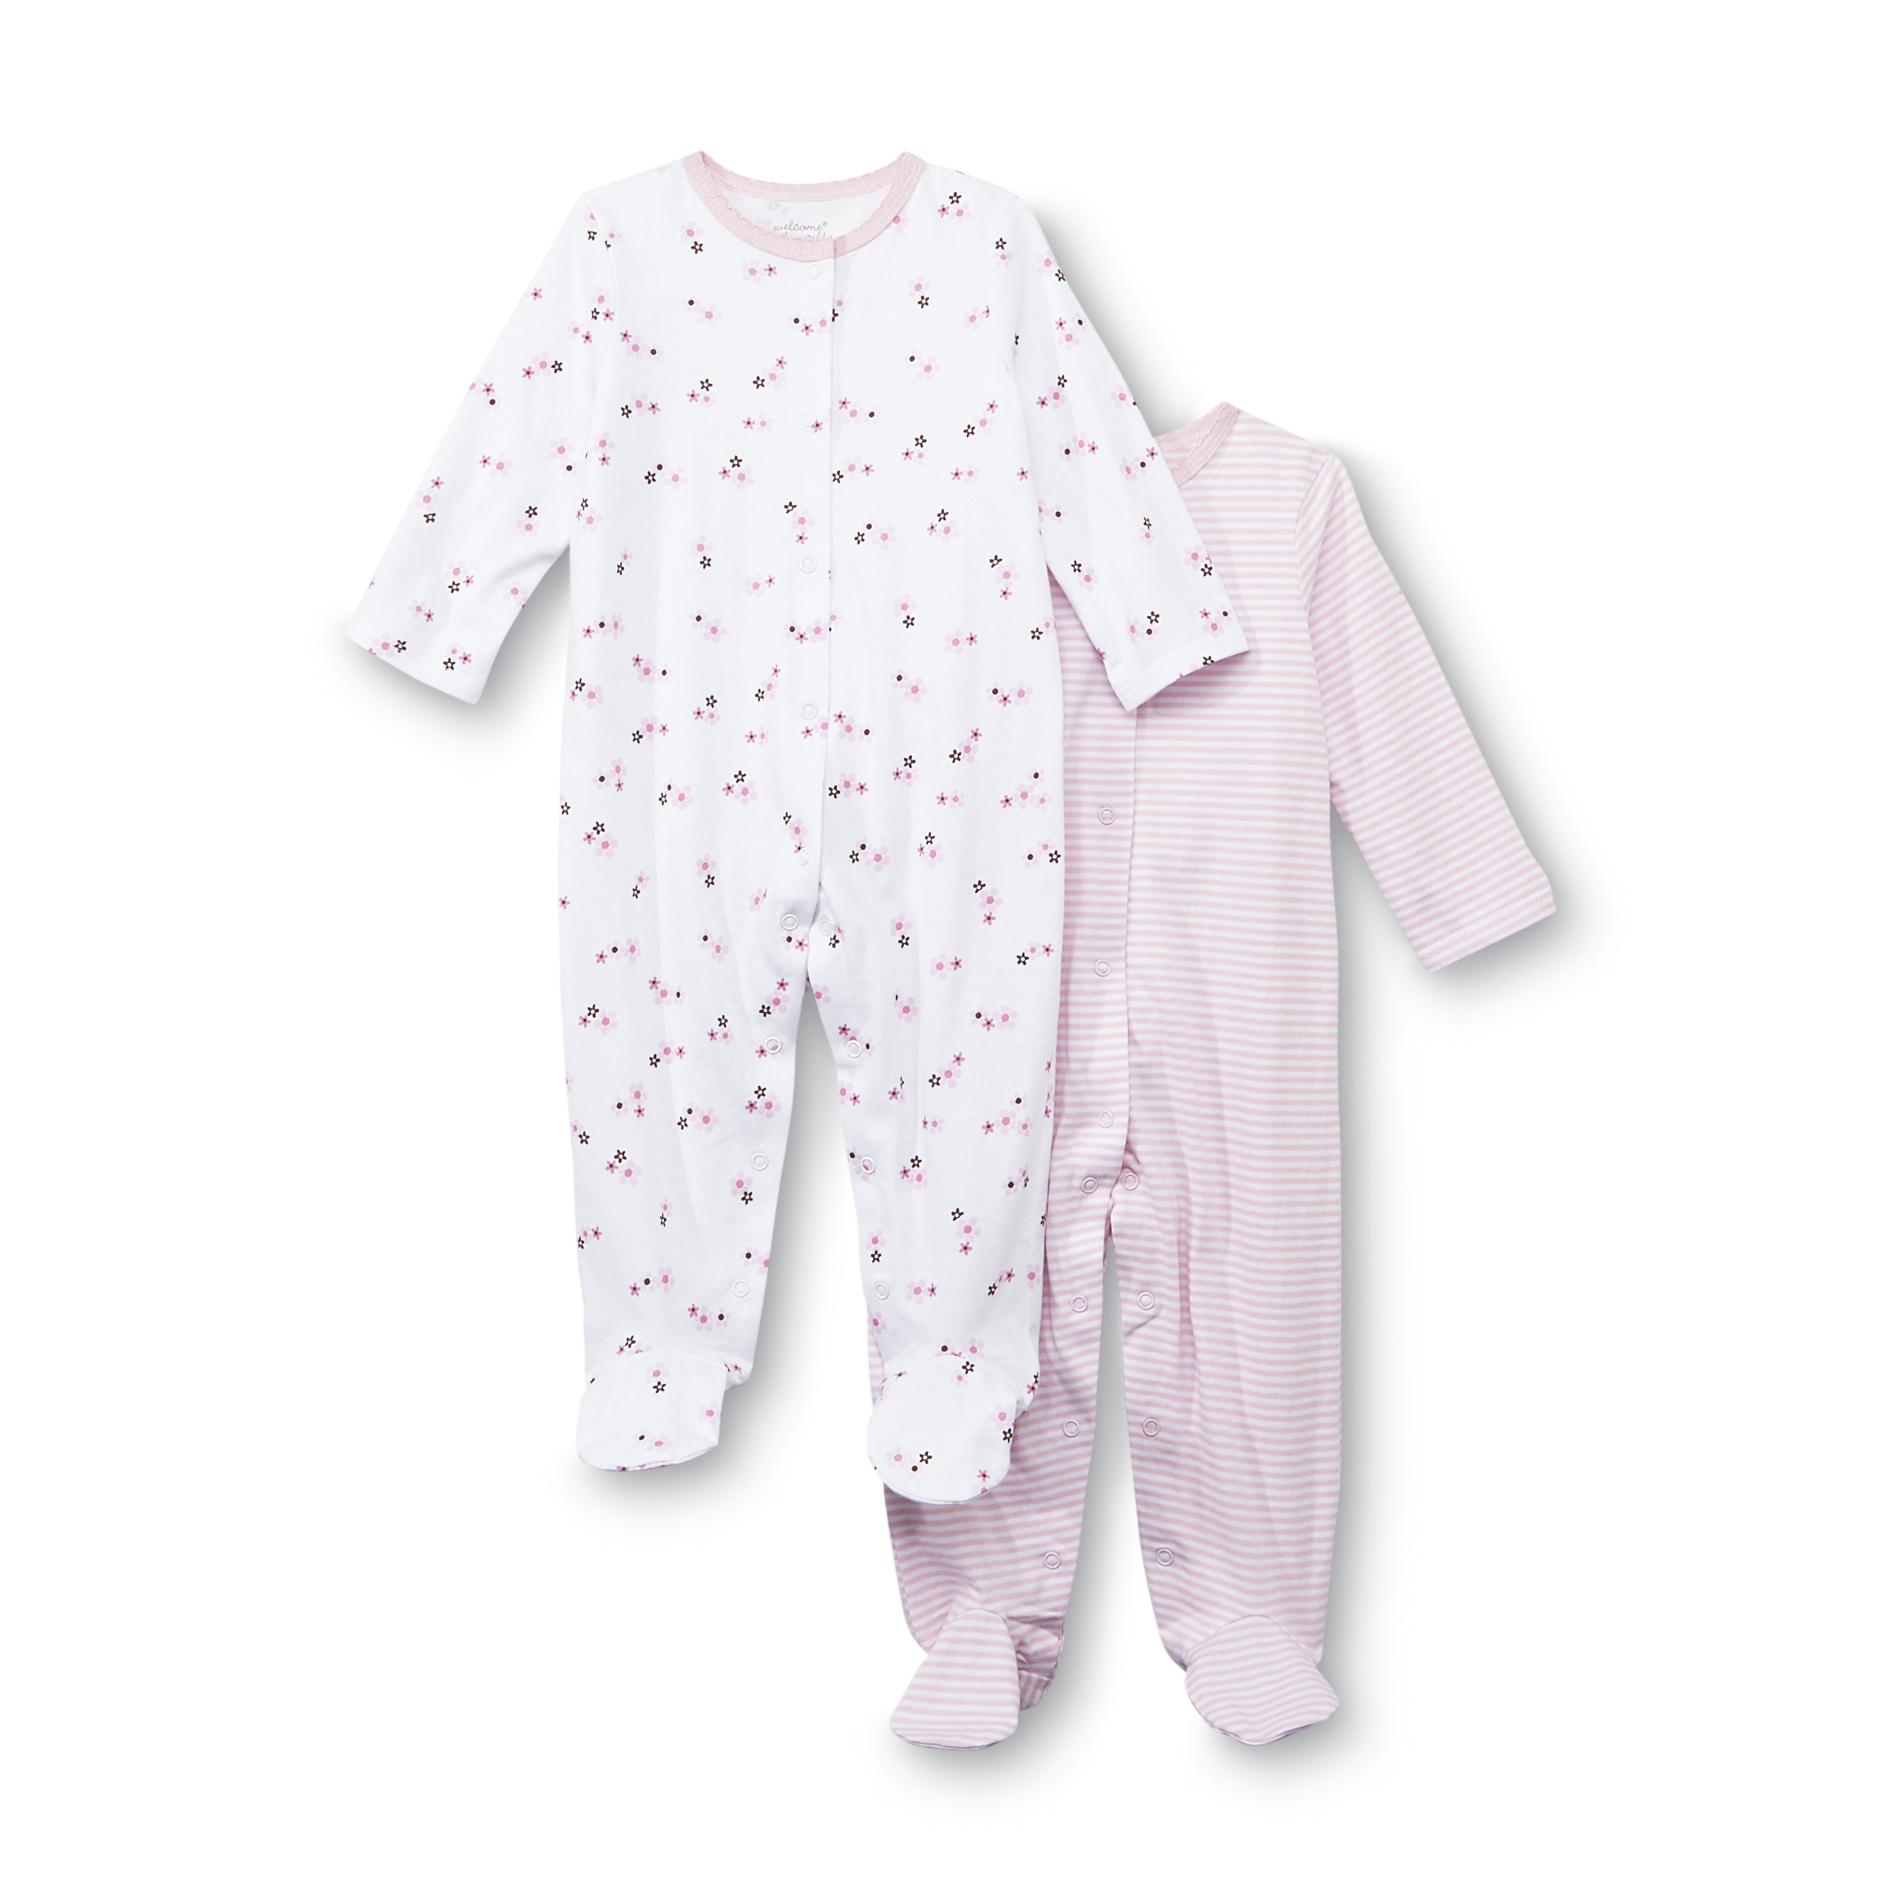 Welcome to the World Newborn Girl's 2-Pack Footed Sleeper Pajamas